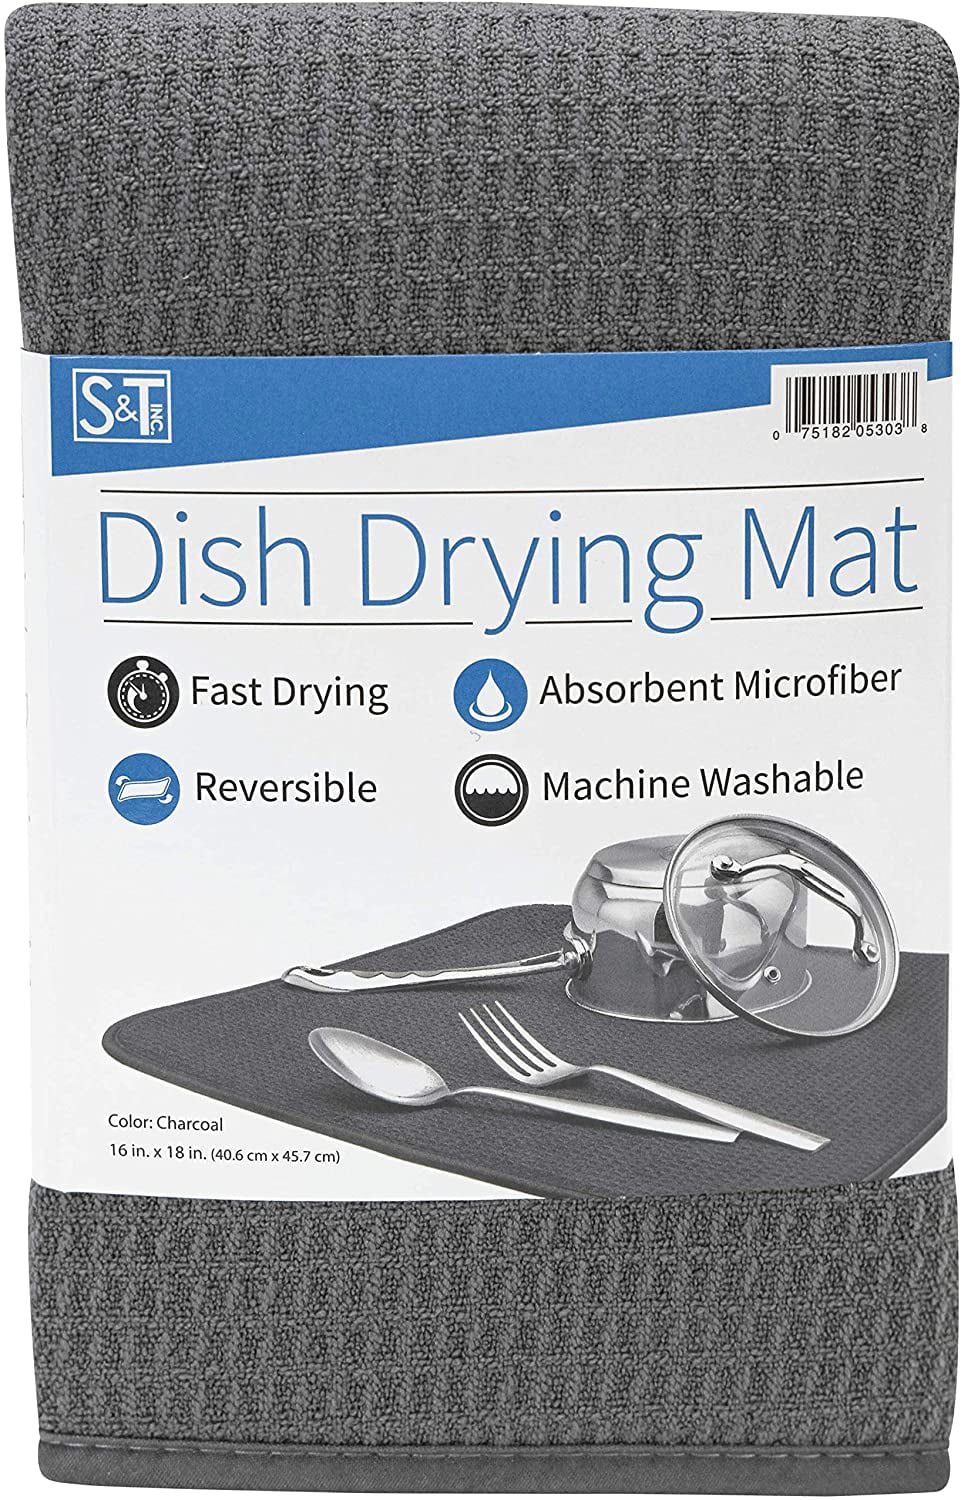 S&T 405100 Microfiber Dish Drying Mat, X-Large, 18 by 24-Inch, Cream